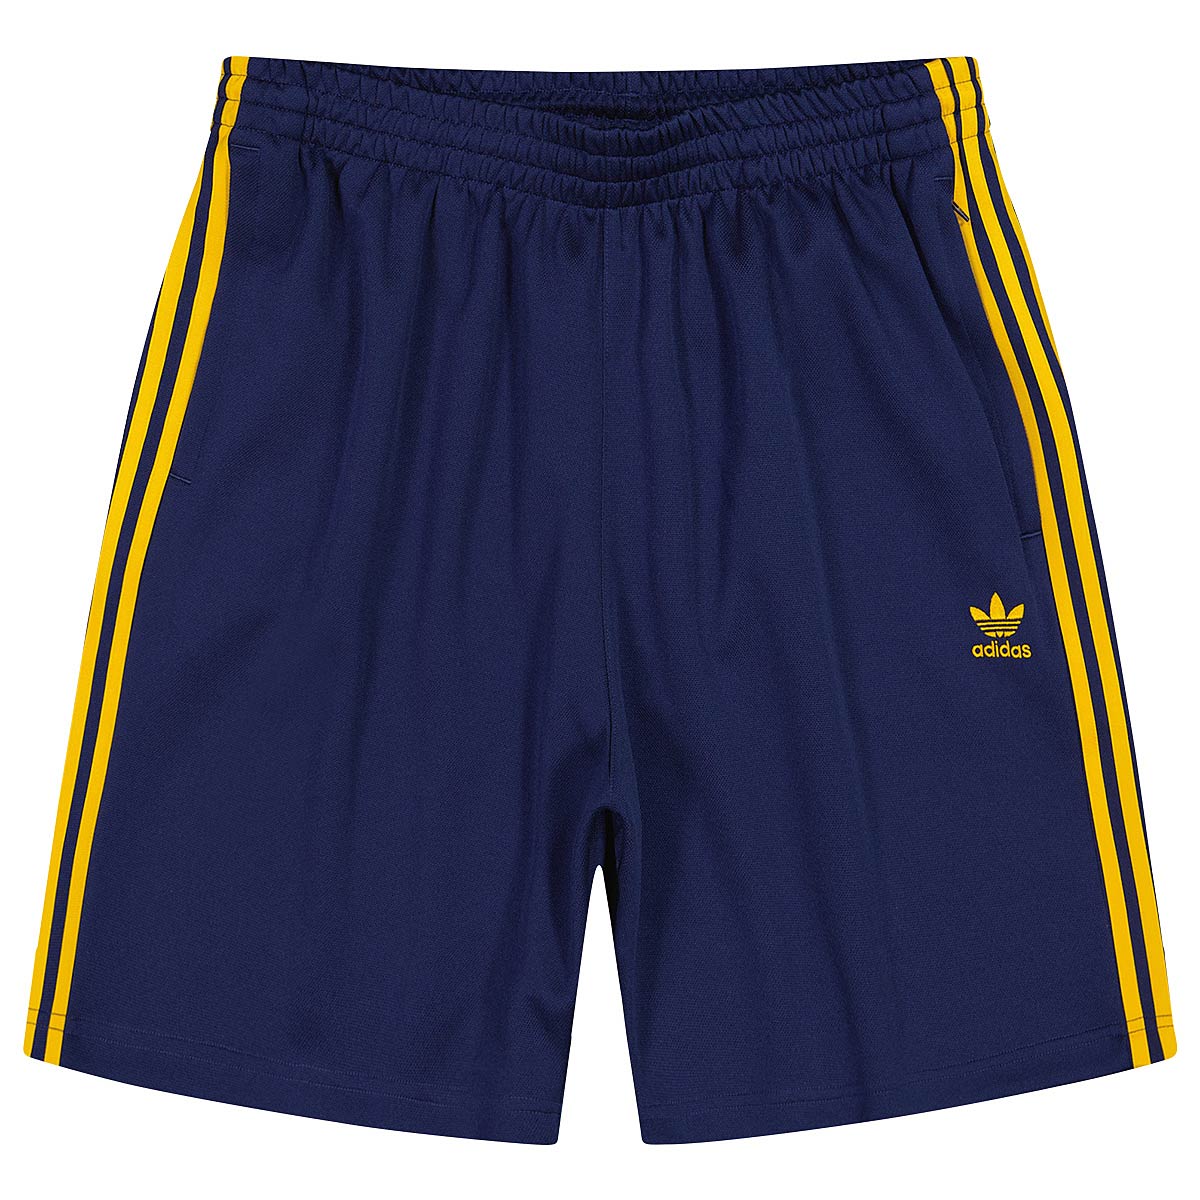 Image of Adidas Cl+ Shorts, Dkblue/yellow